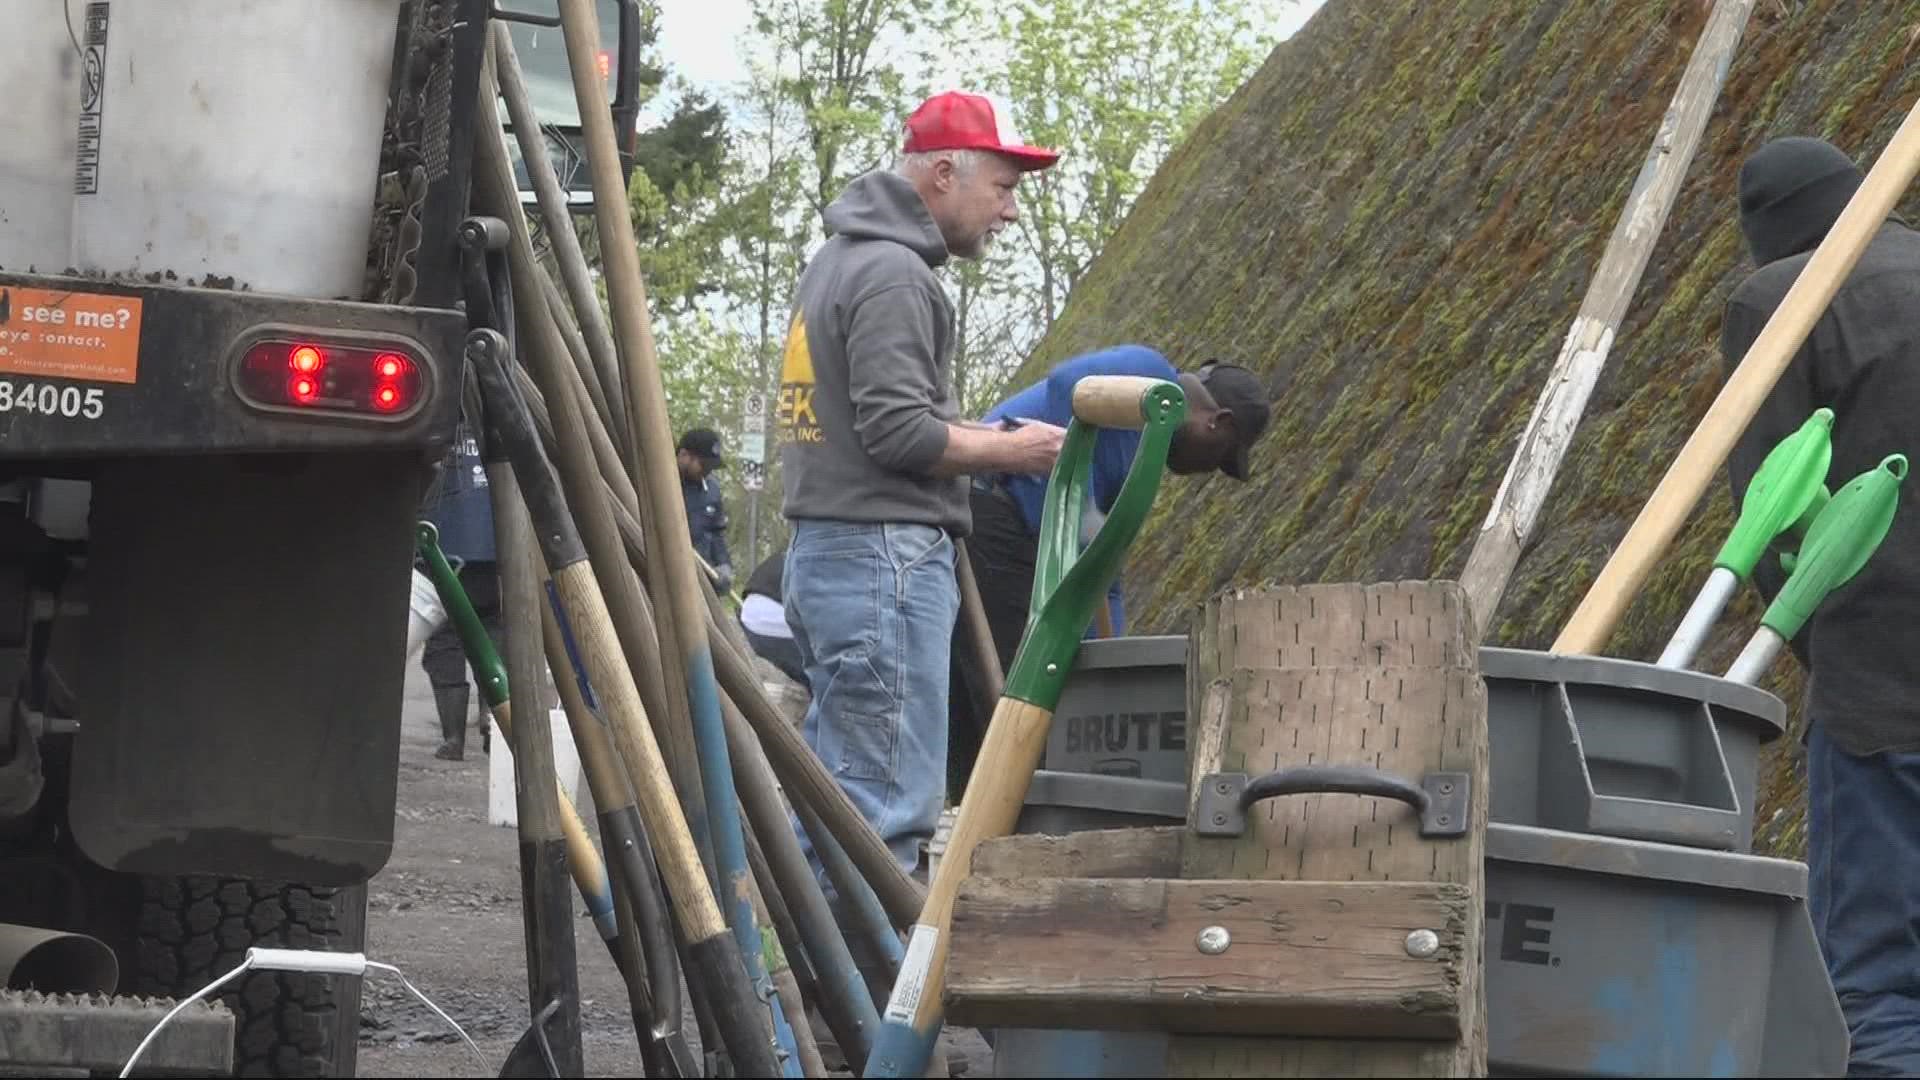 Portland's Community Volunteer Corps teaches skills to find work to homeless people or those struggling with addiction.